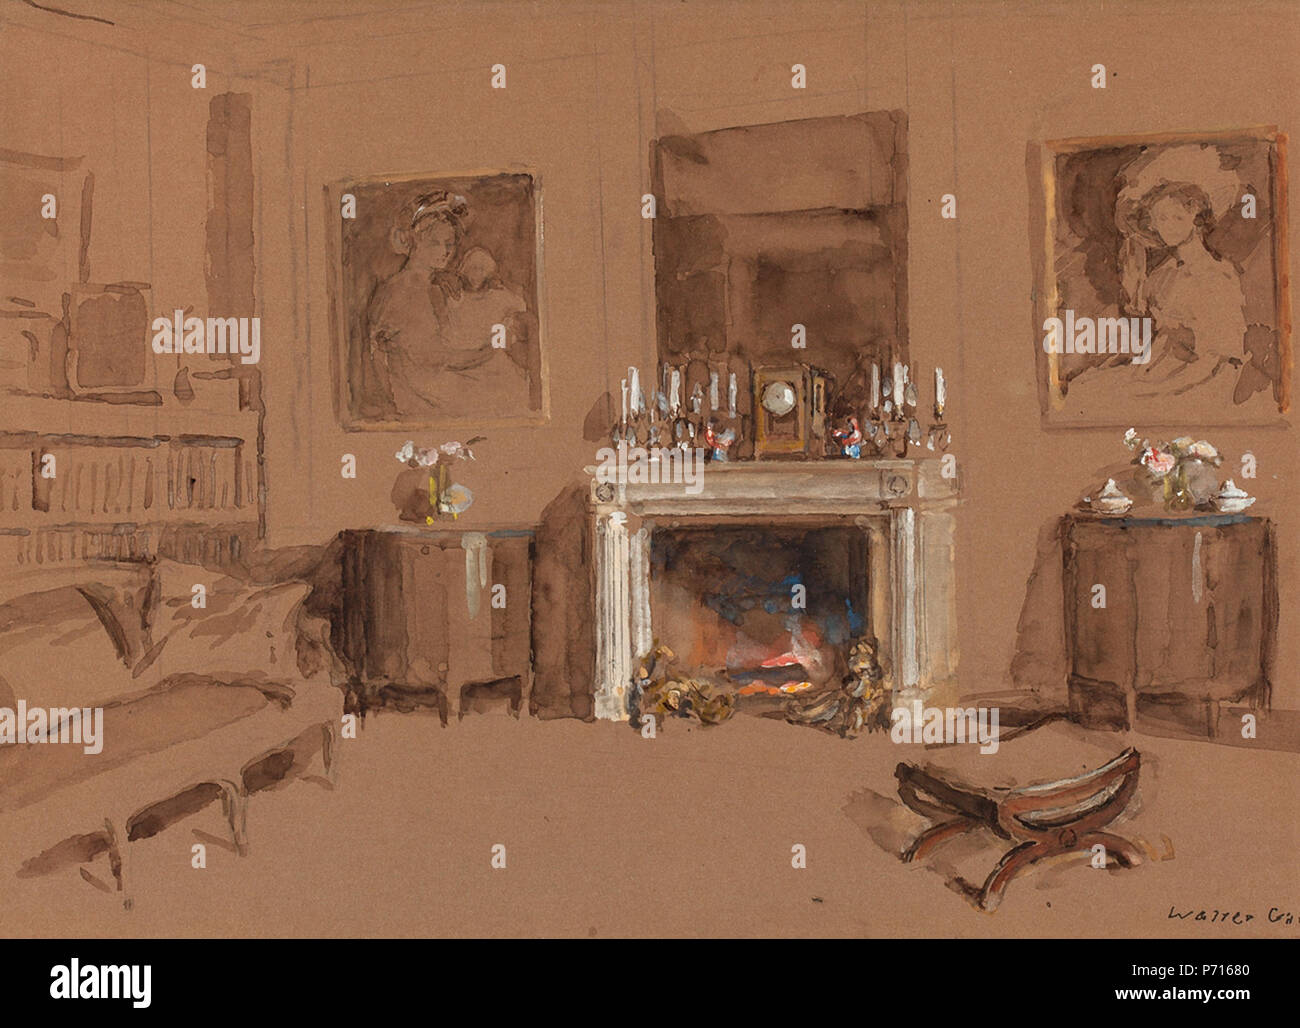 English: Interior with Fireplace by Walter Gay, ink wash and gouache on brown paper, 11 x 15¼ inches . N/A 126 Interior with Fireplace by Walter Gay Stock Photo